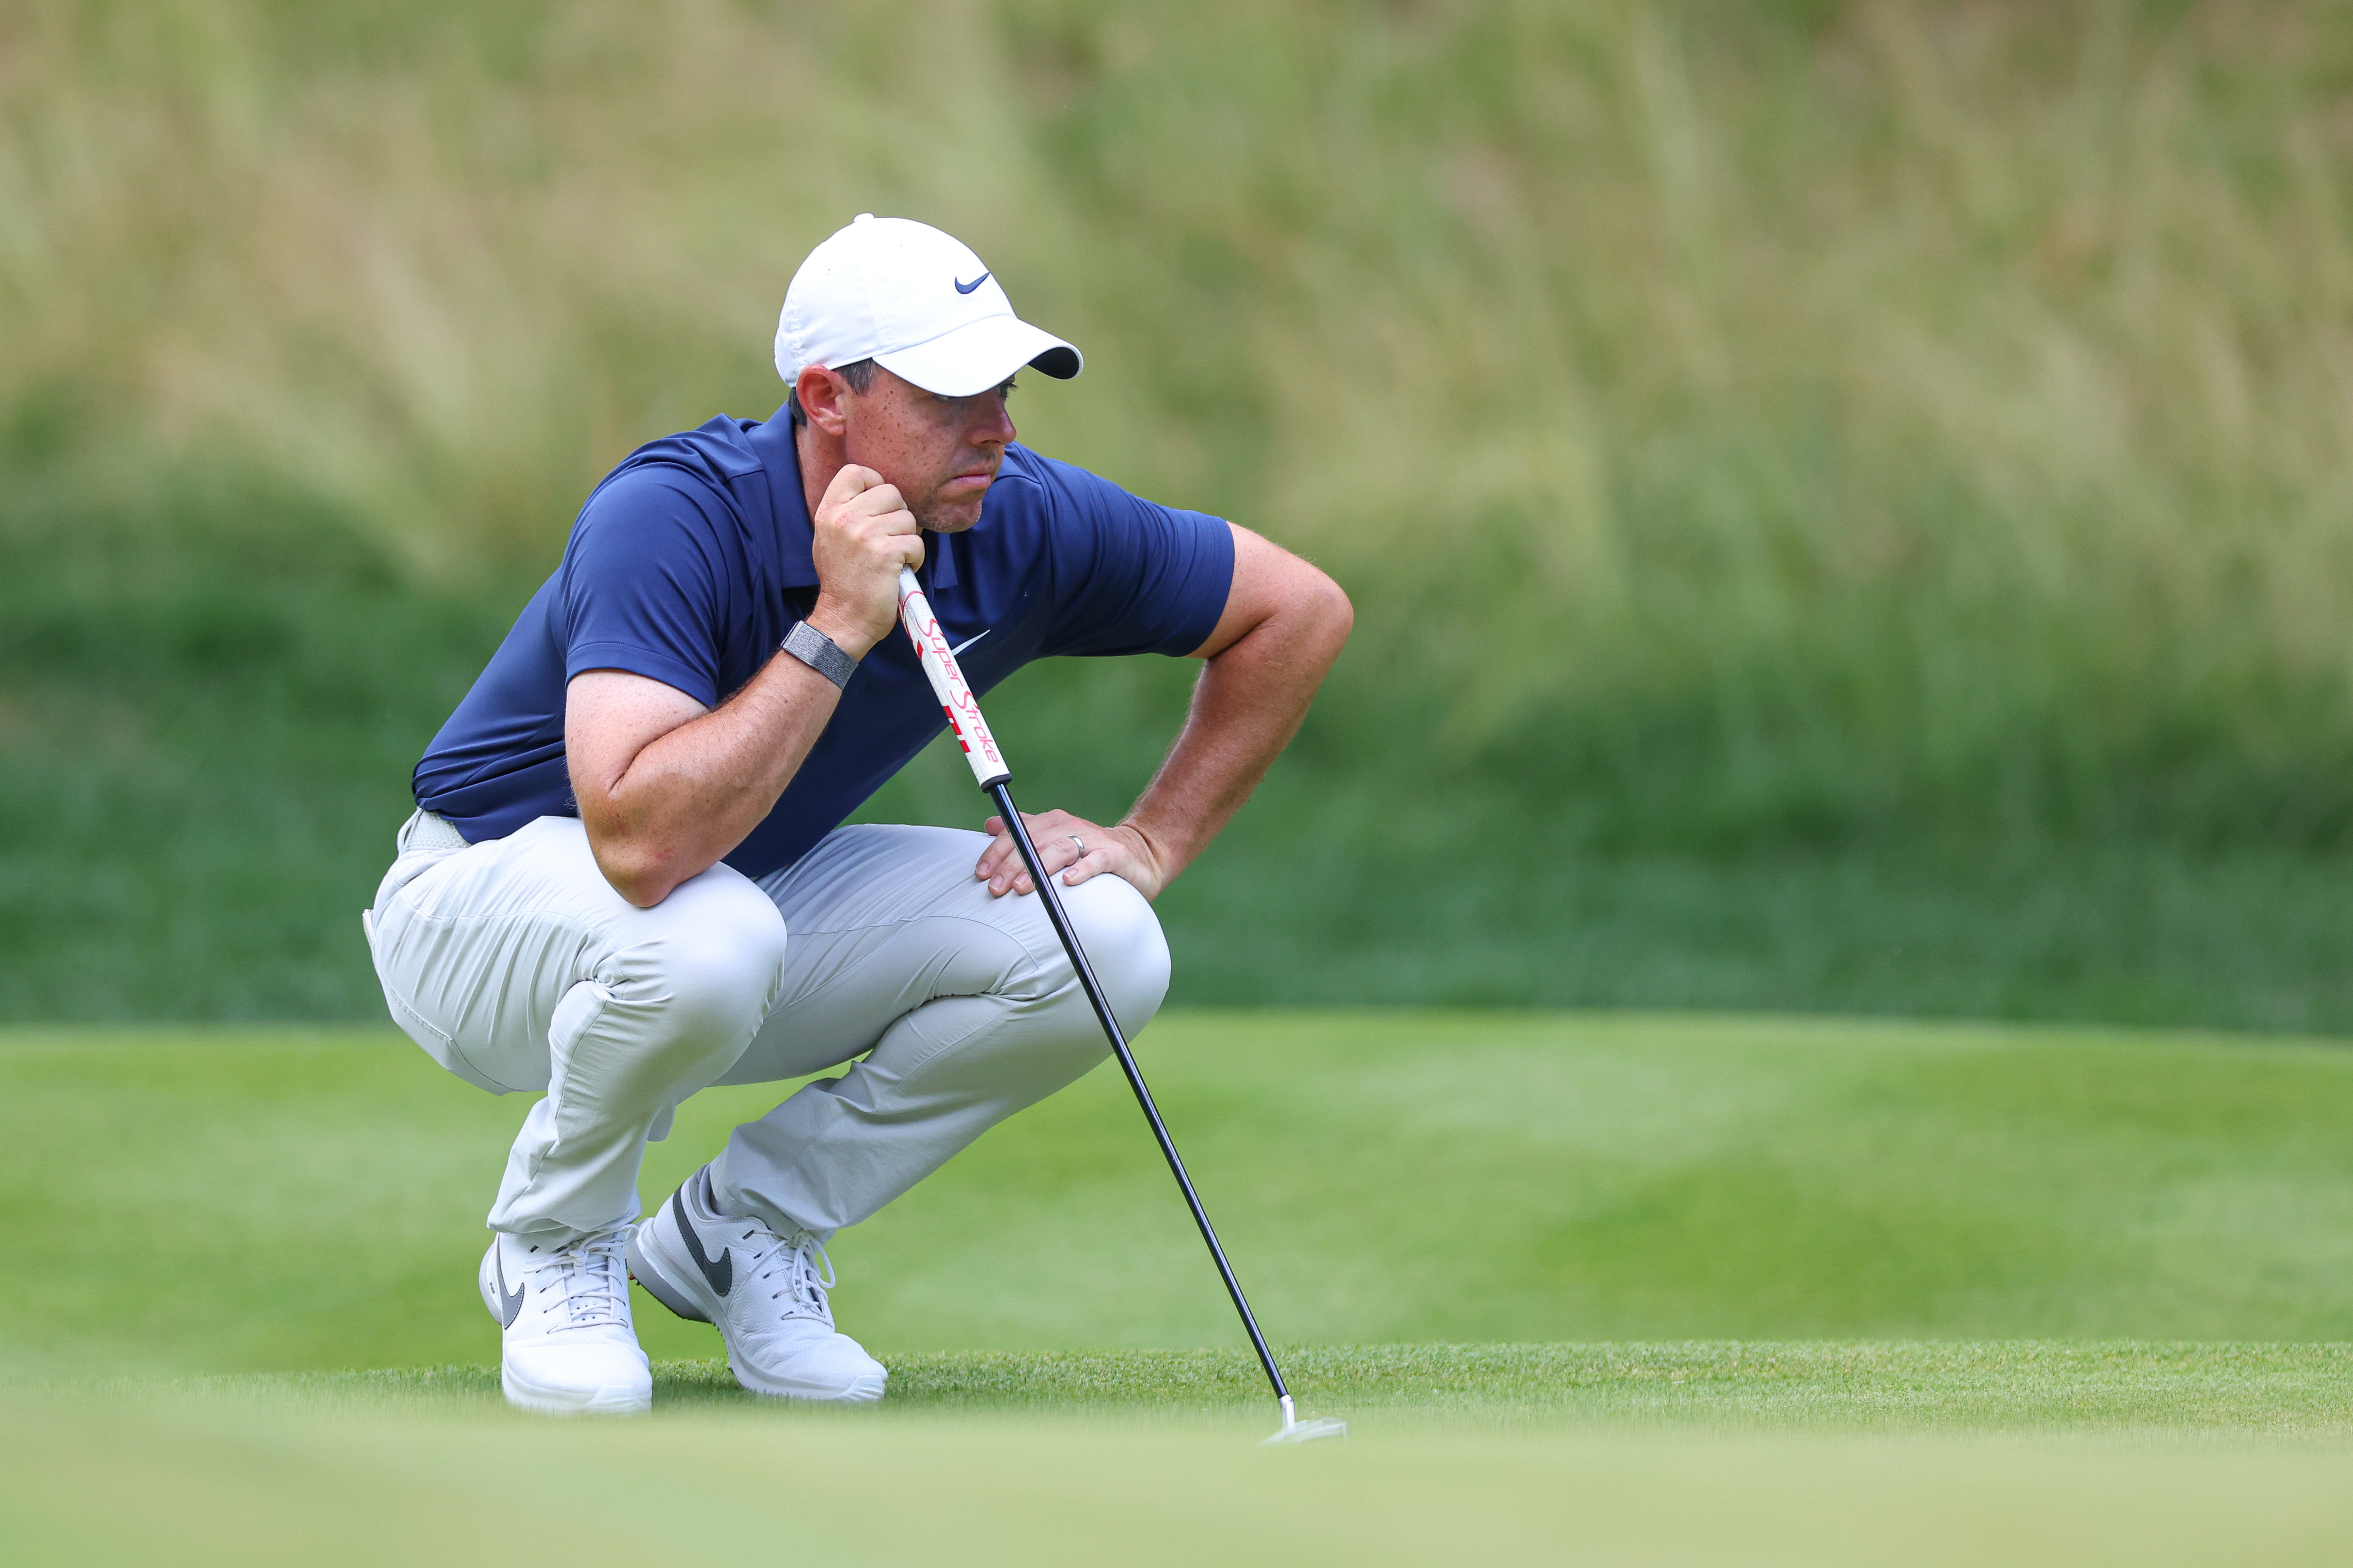 Rory McIlroy looks over his putt on the 14th green during the final round of the Travelers Championship golf tournament.